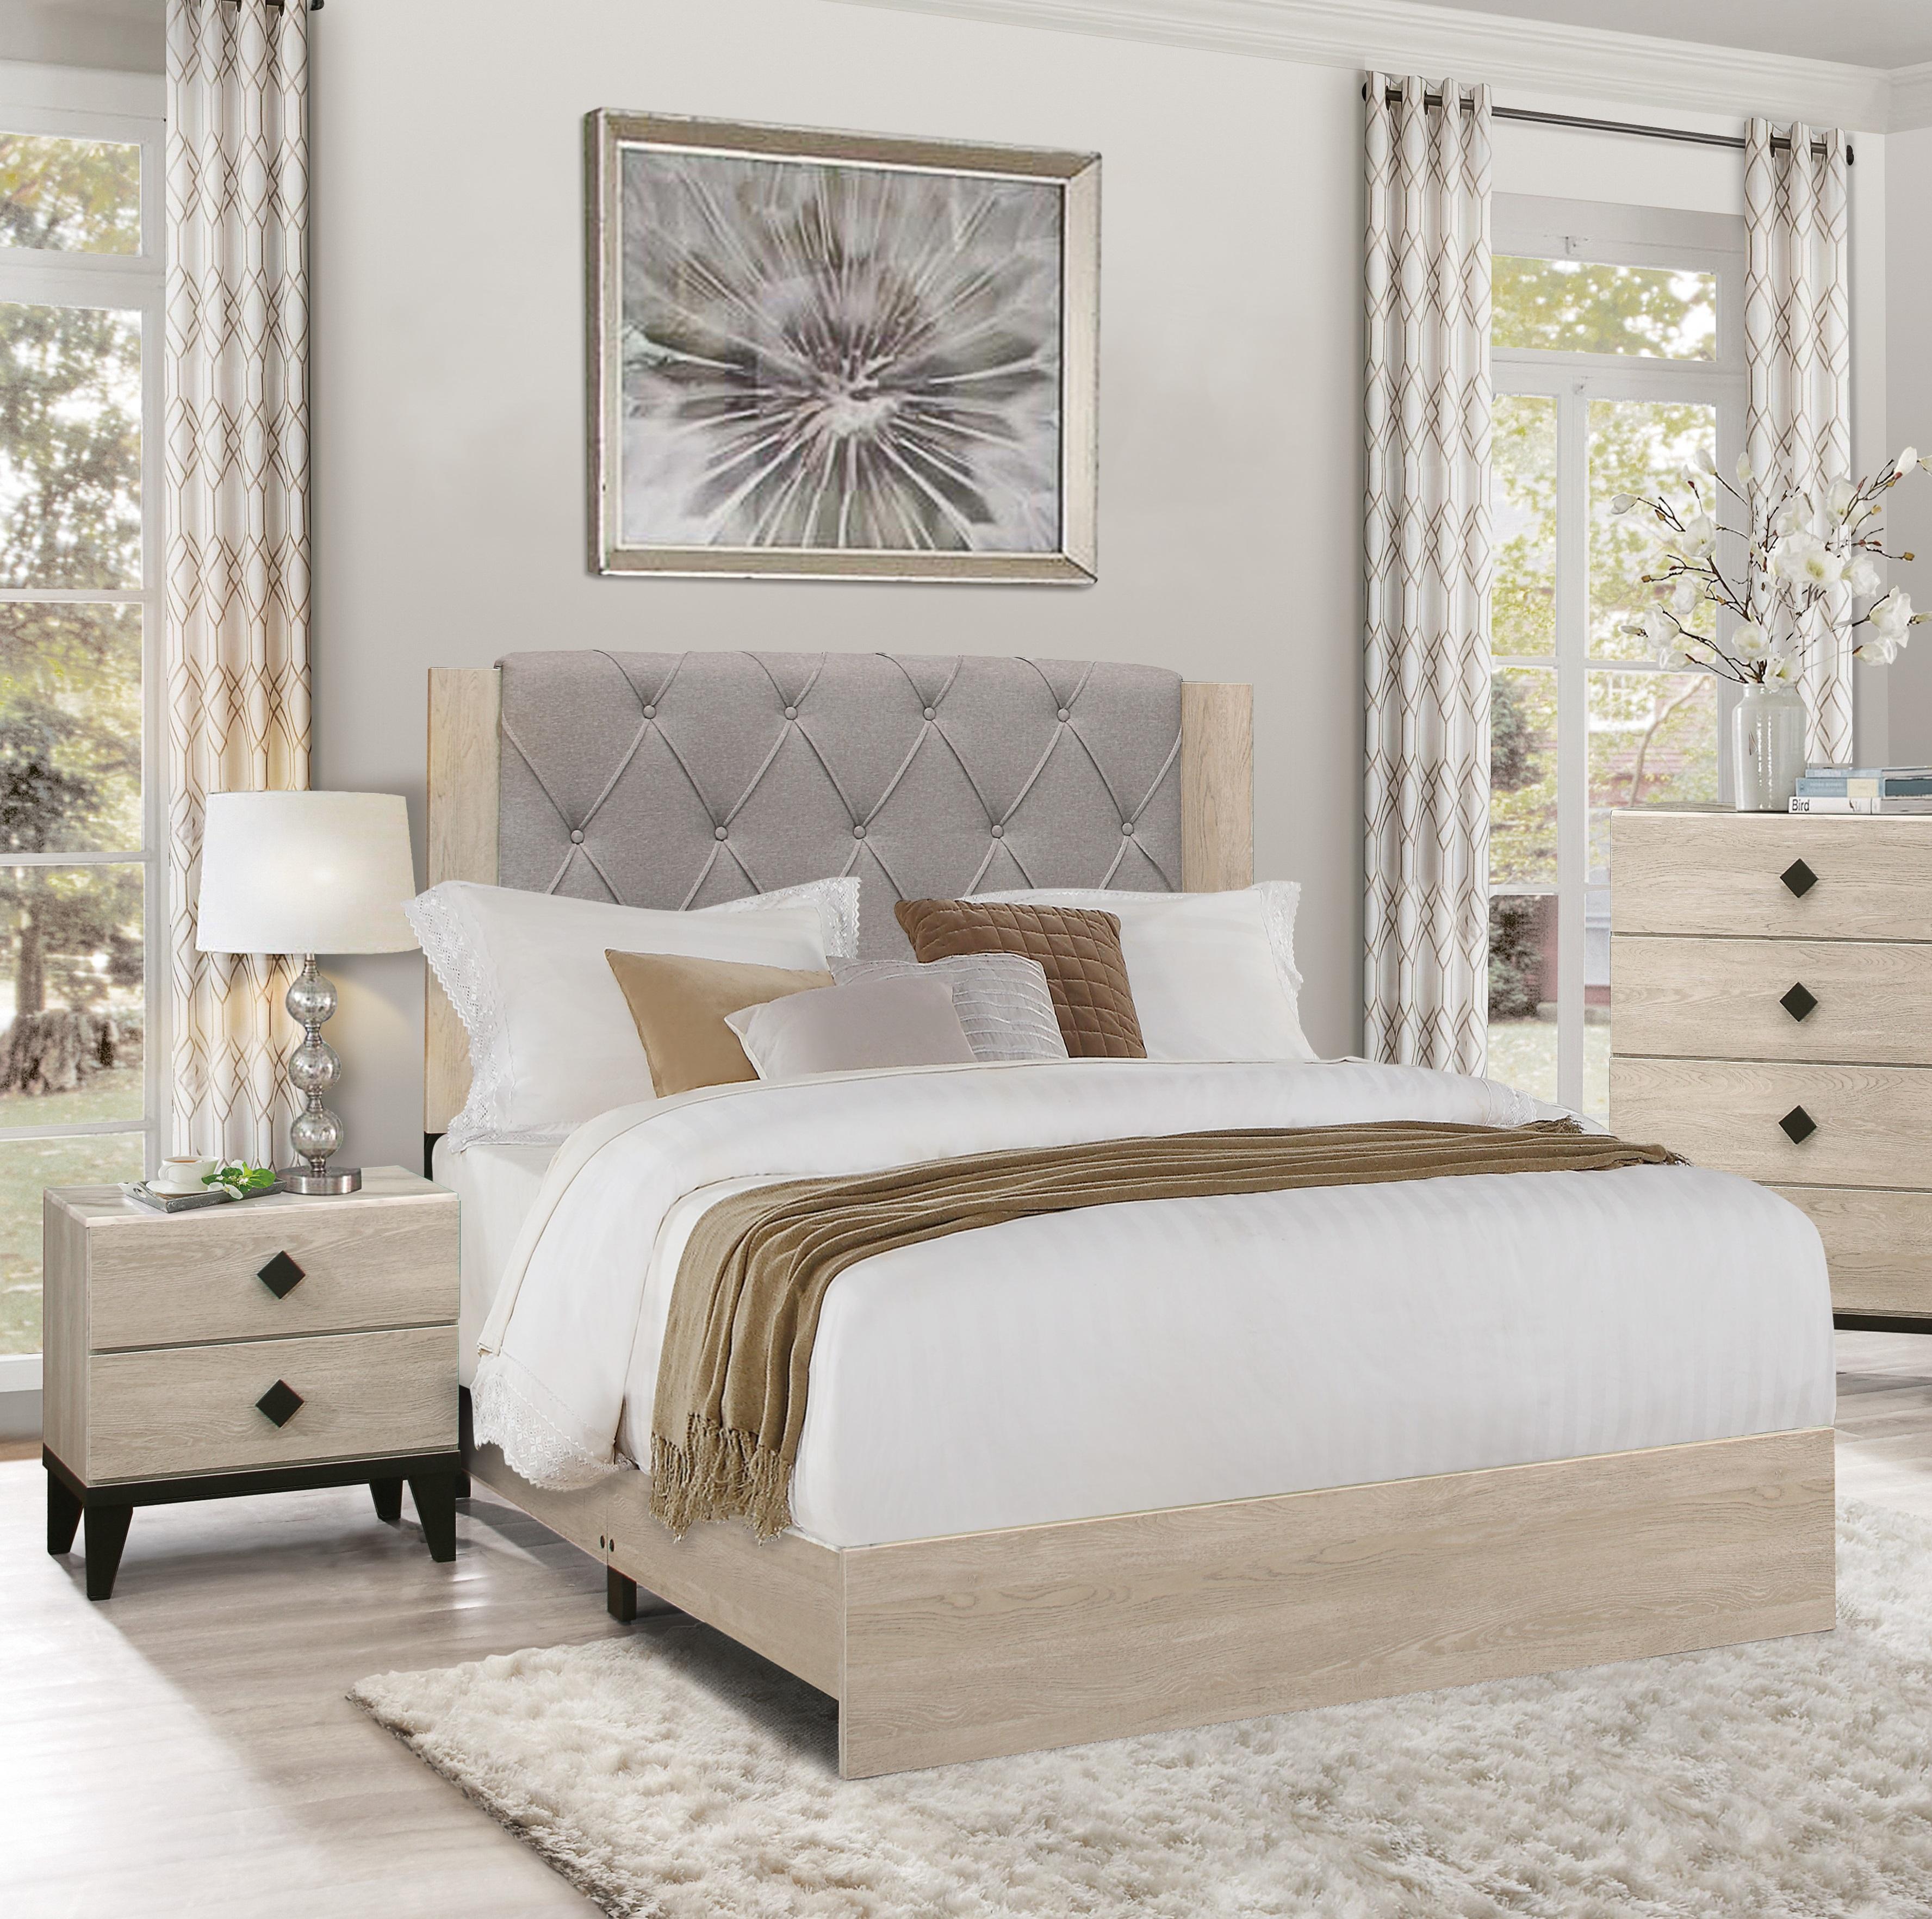 Modern Bedroom Set 1524F-1-3PC Whiting 1524F-1-3PC in Cream Polyester